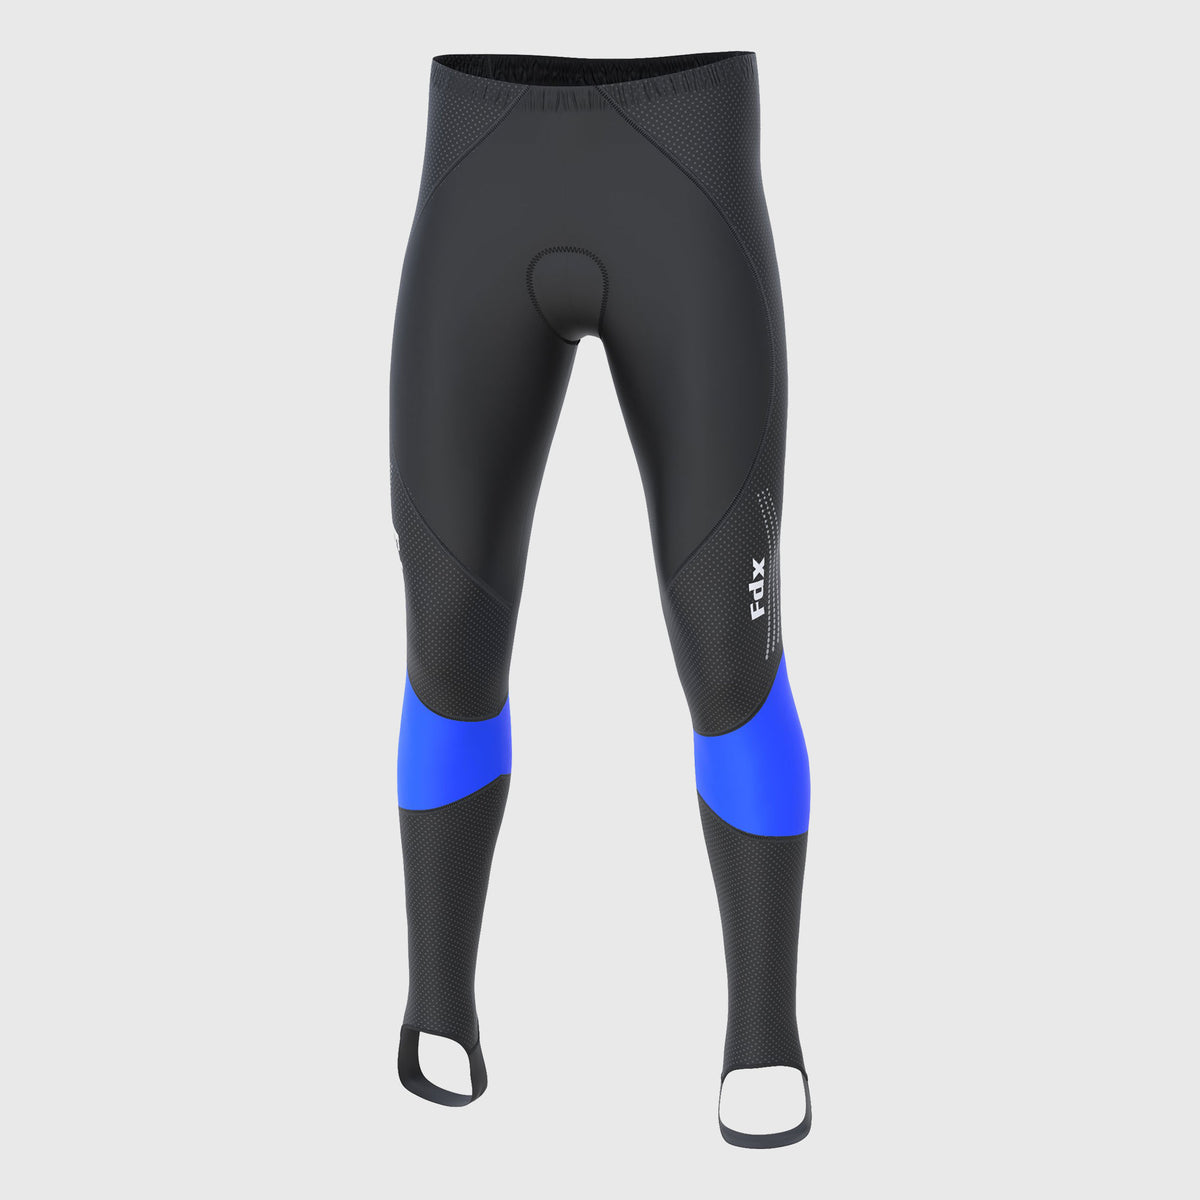 thermal cycling tights, thermal cycling tights Suppliers and Manufacturers  at